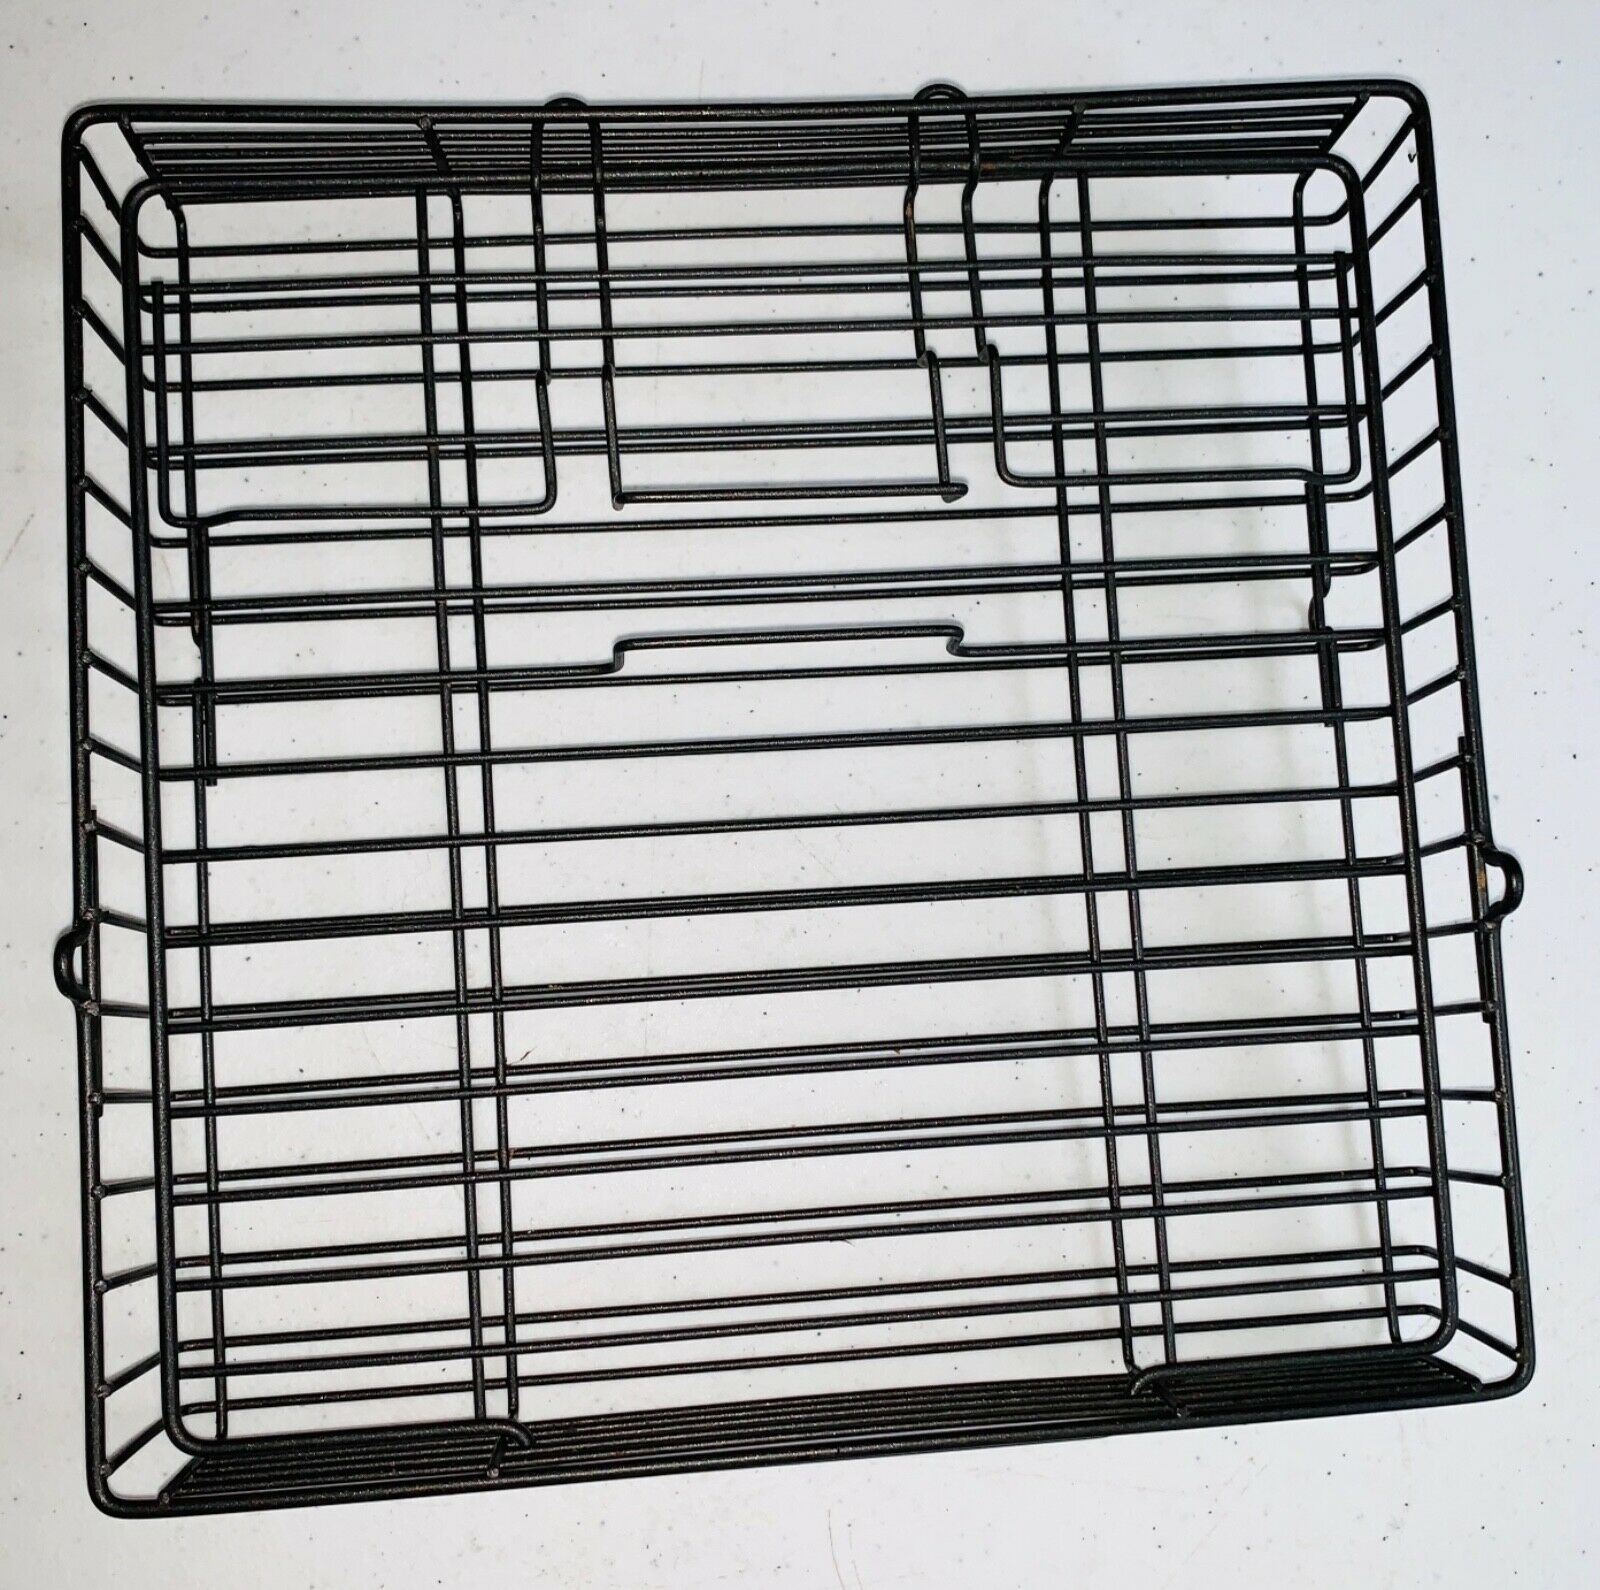 Ronco Showtime Rotisserie Large Wire Basket 4000 5000 - Replacement Parts